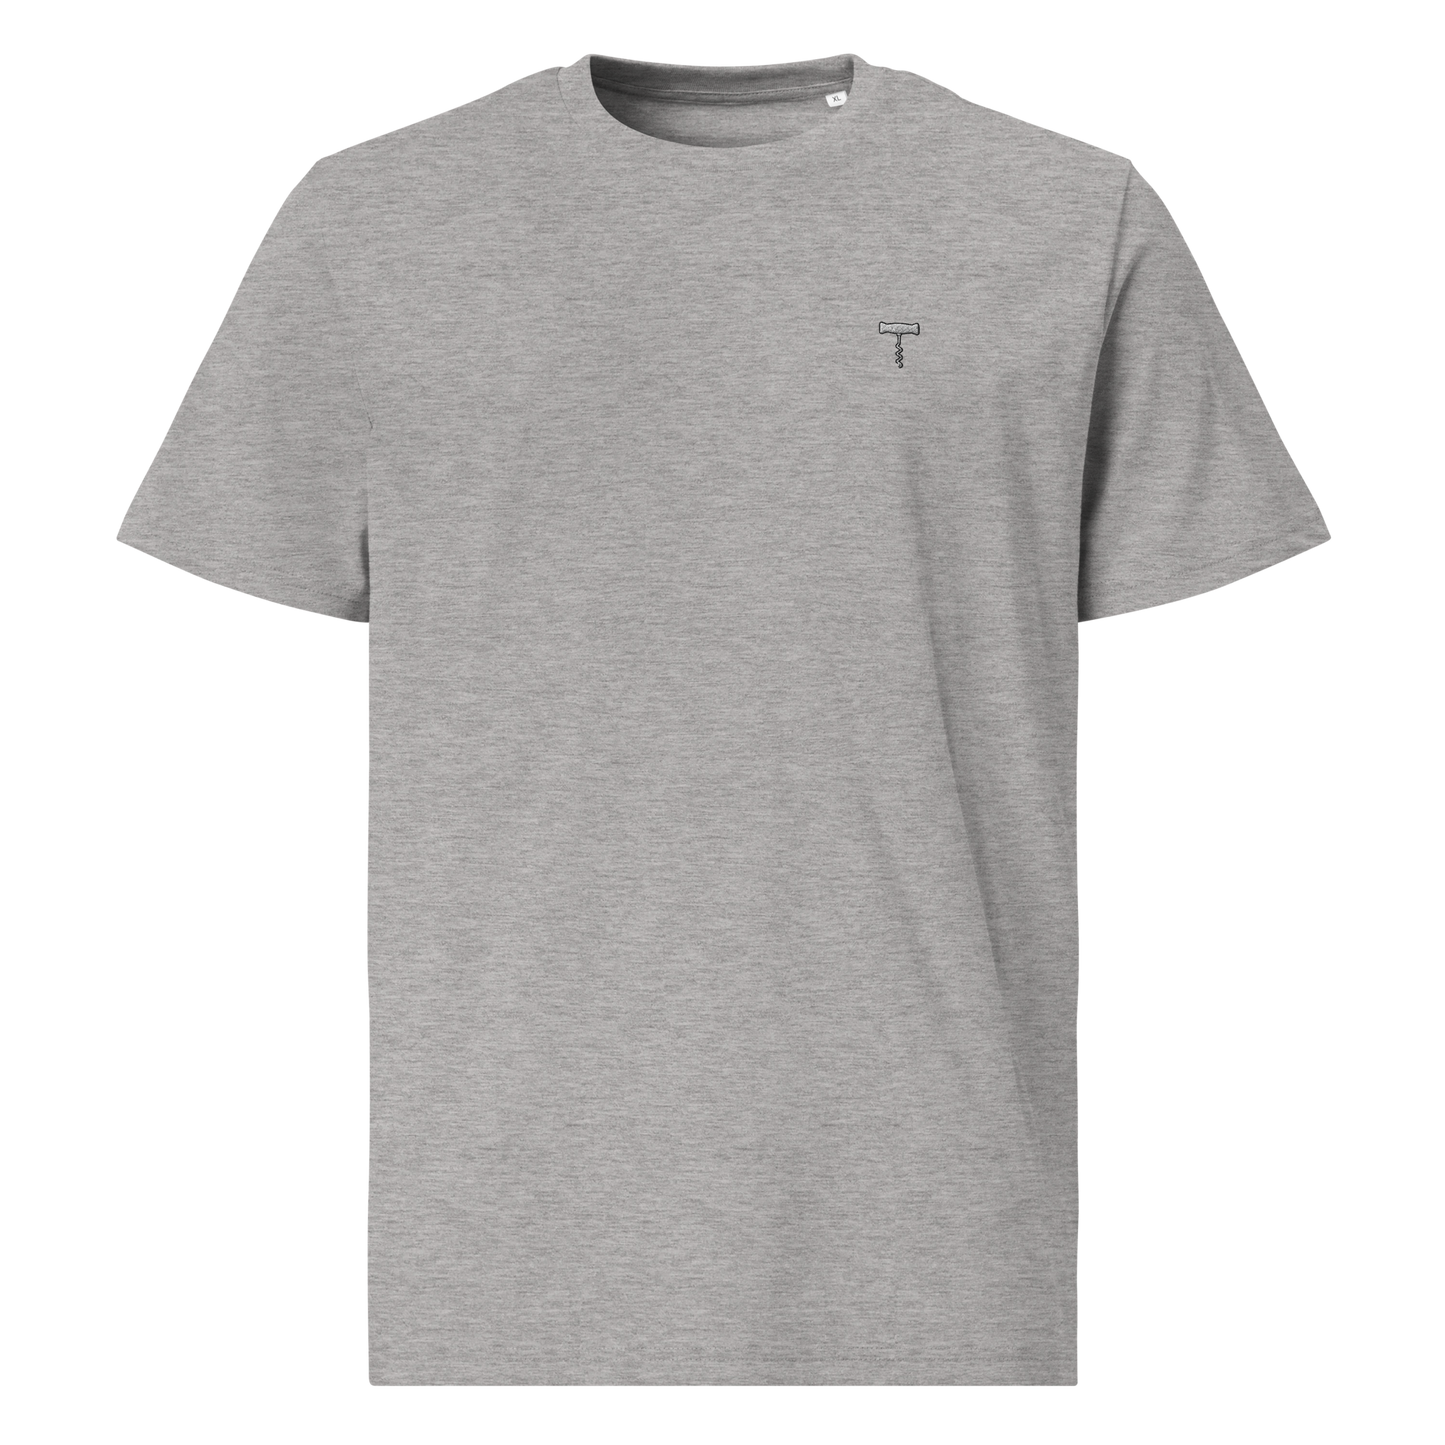 Wine Key grey embroidered t-shirt